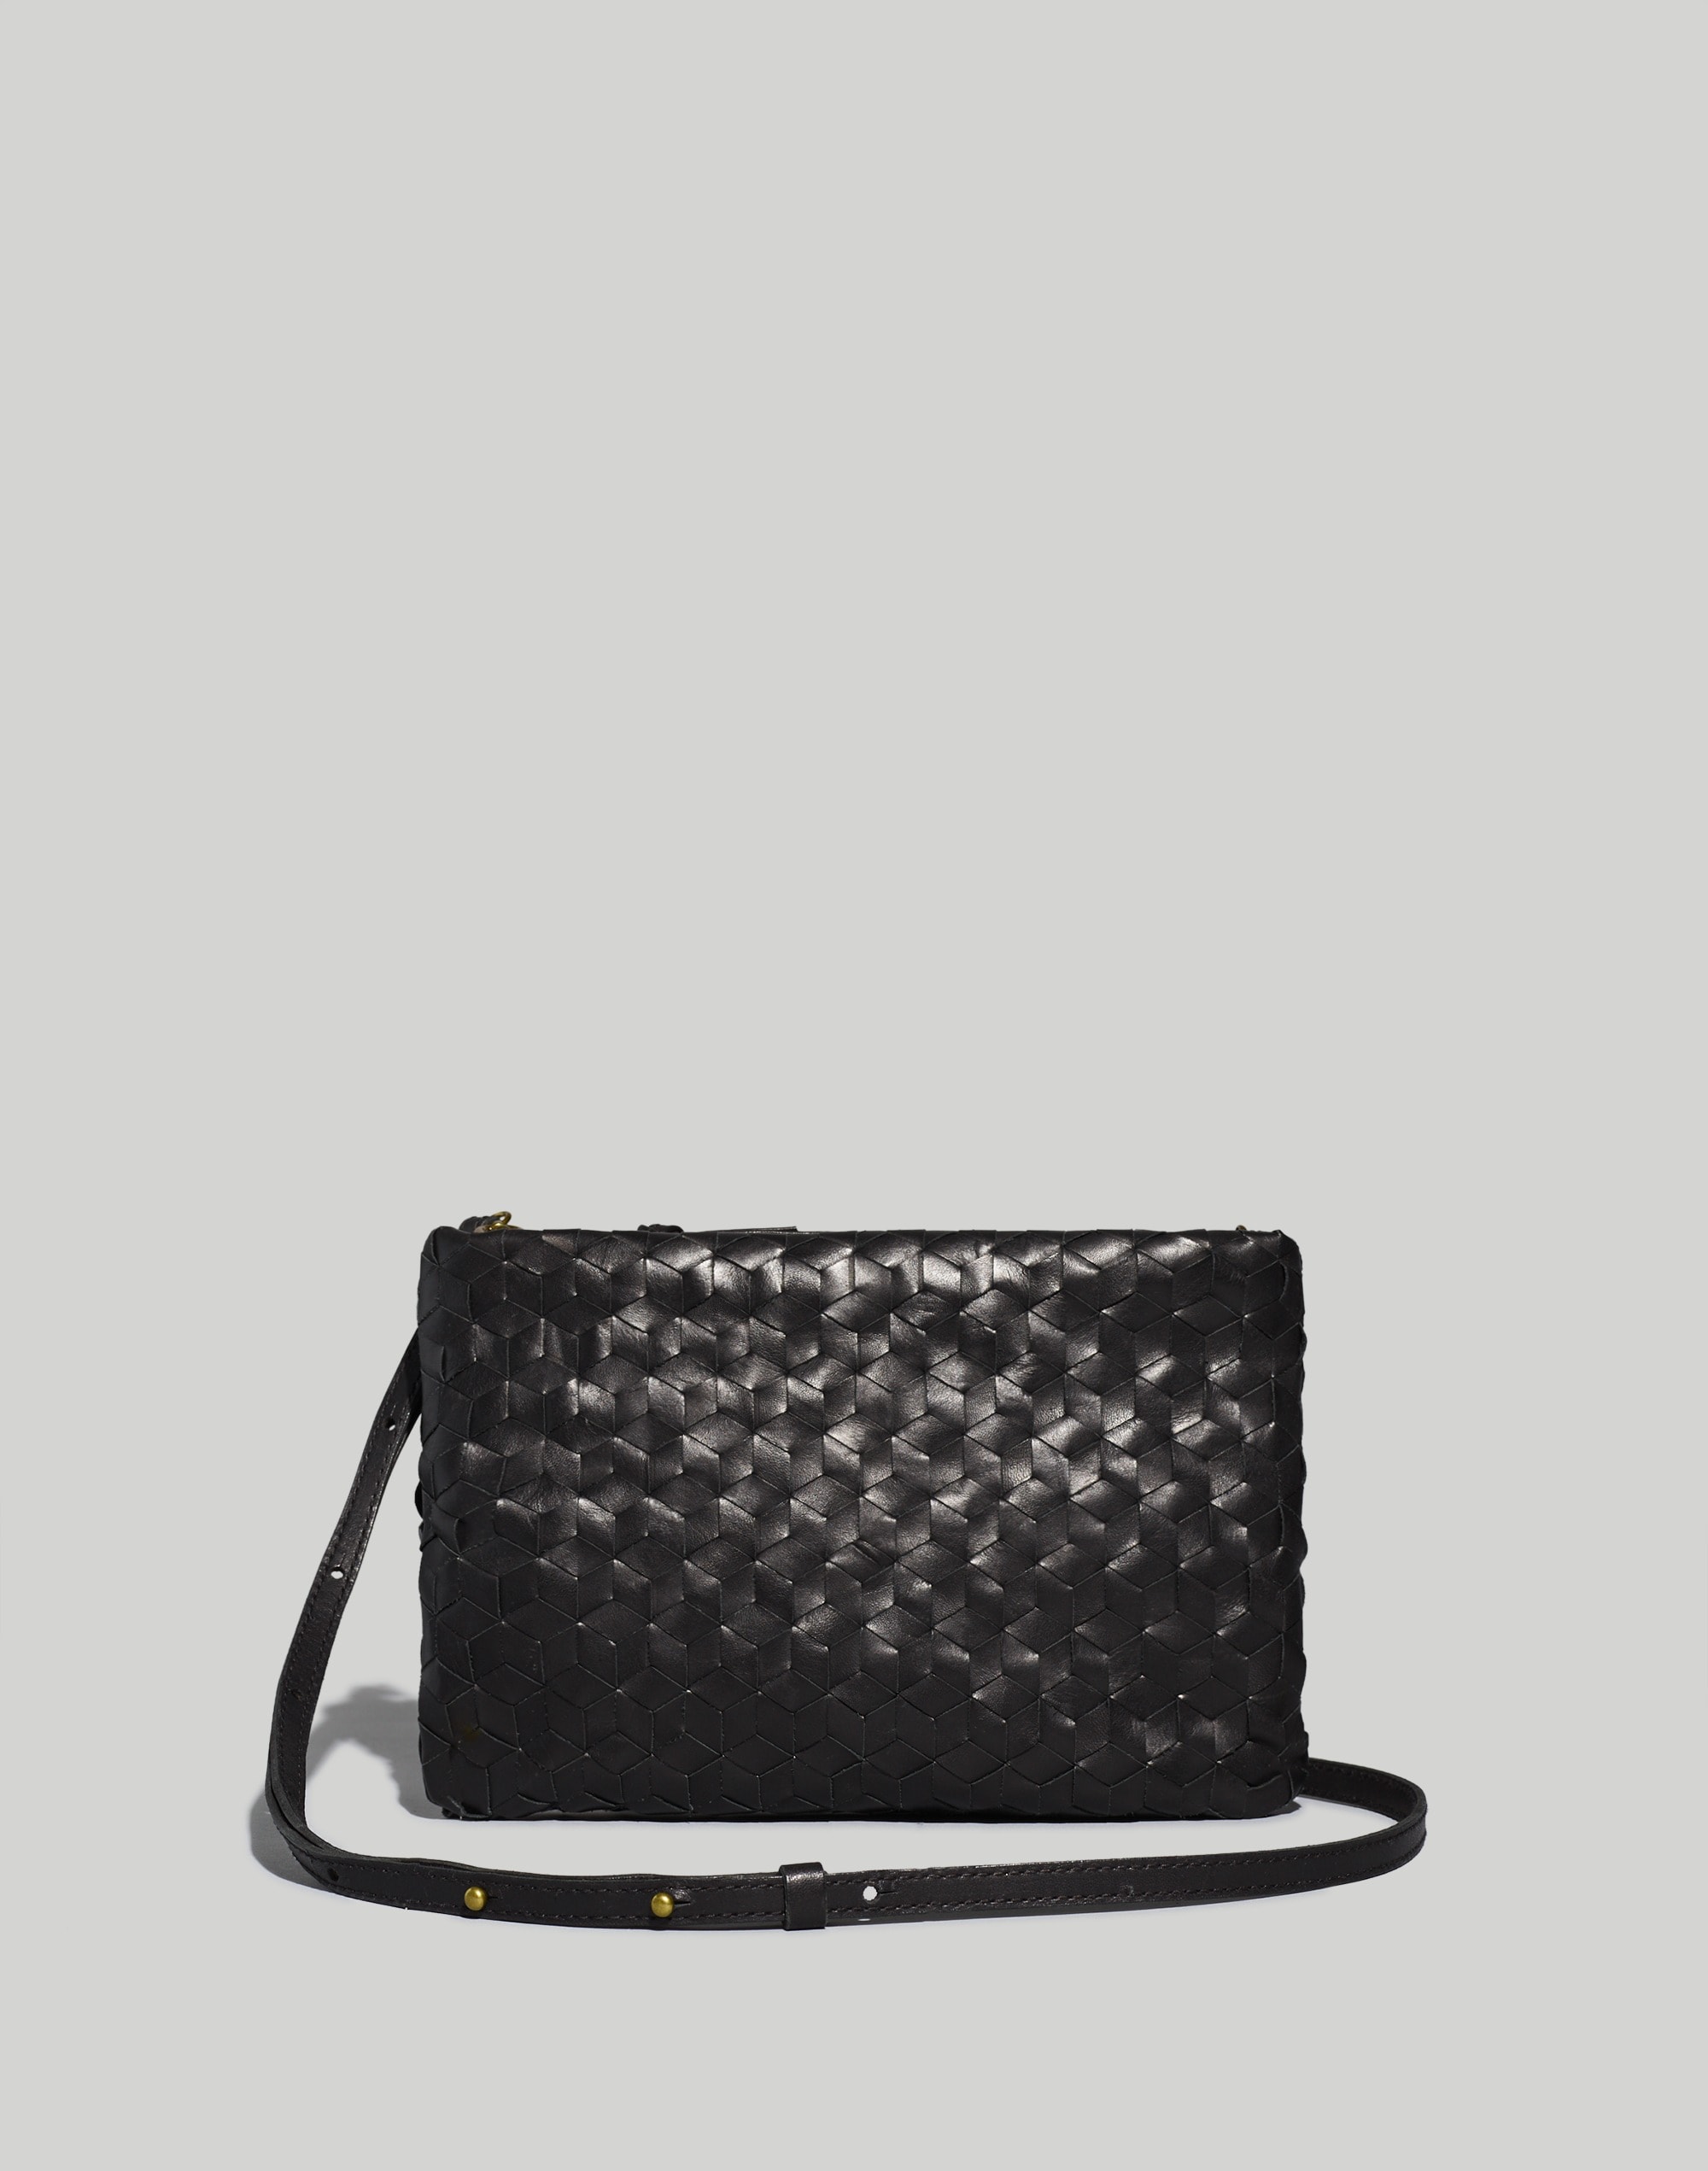 Mw The Puff Crossbody Bag: Woven Leather Edition In True Black